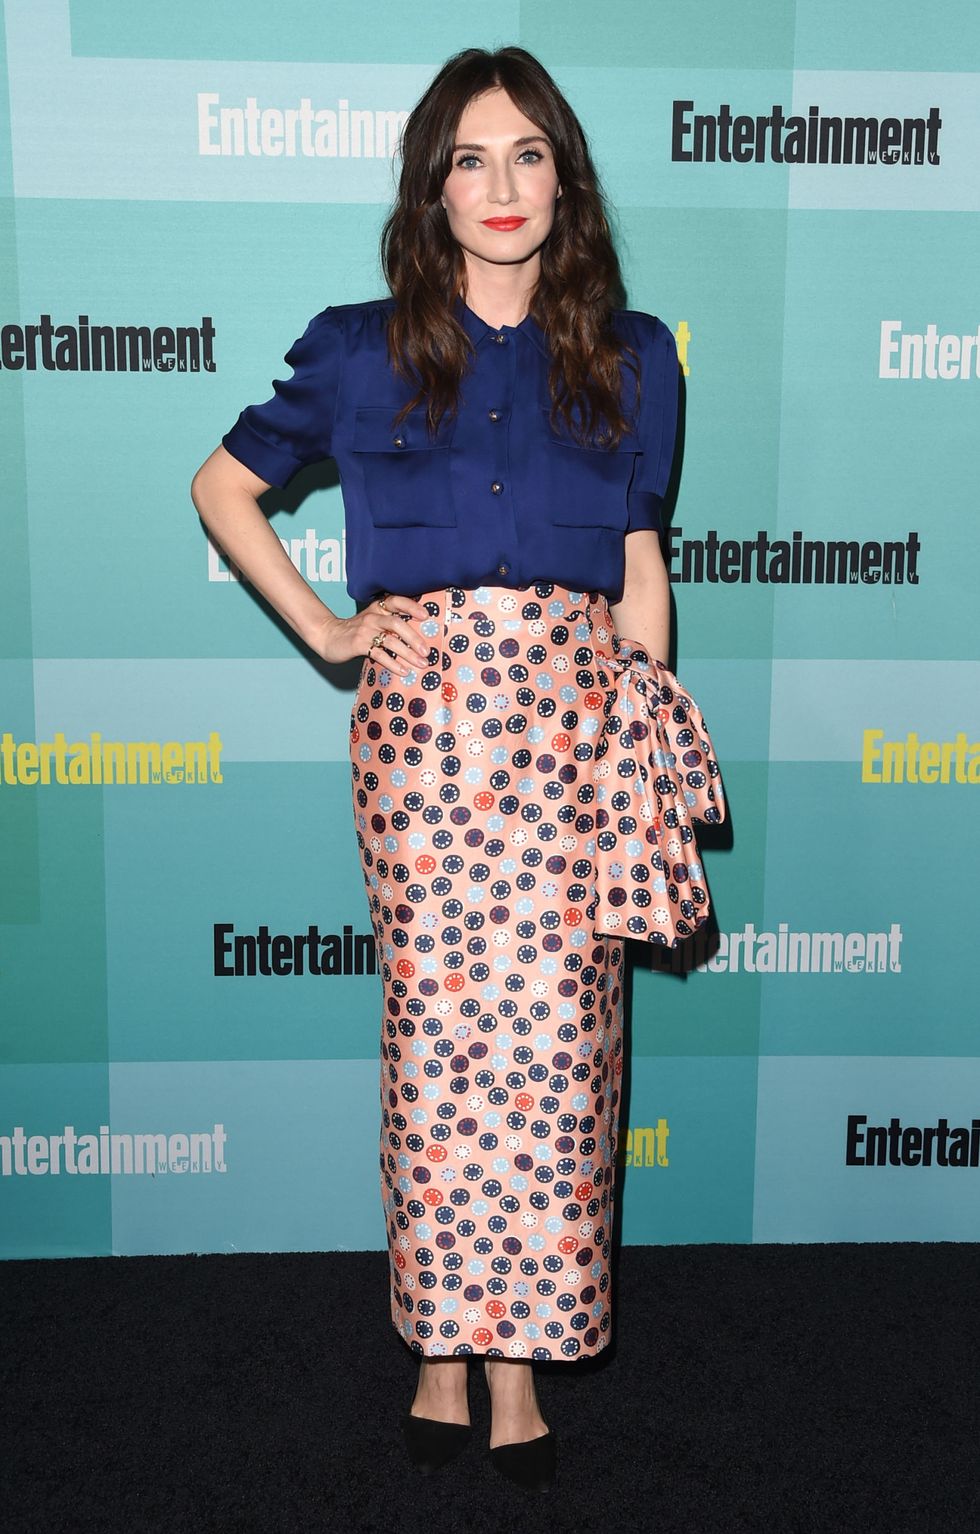 SAN DIEGO, CA - JULY 11:  Actress Carice van Houten attends Entertainment Weekly's Annual Comic-Con Party in celebration of Comic-Con 2015 at FLOAT at The Hard Rock Hotel on July 11, 2015 in San Diego, California.  (Photo by Jason Merritt/Getty Images for Entertainment Weekly)